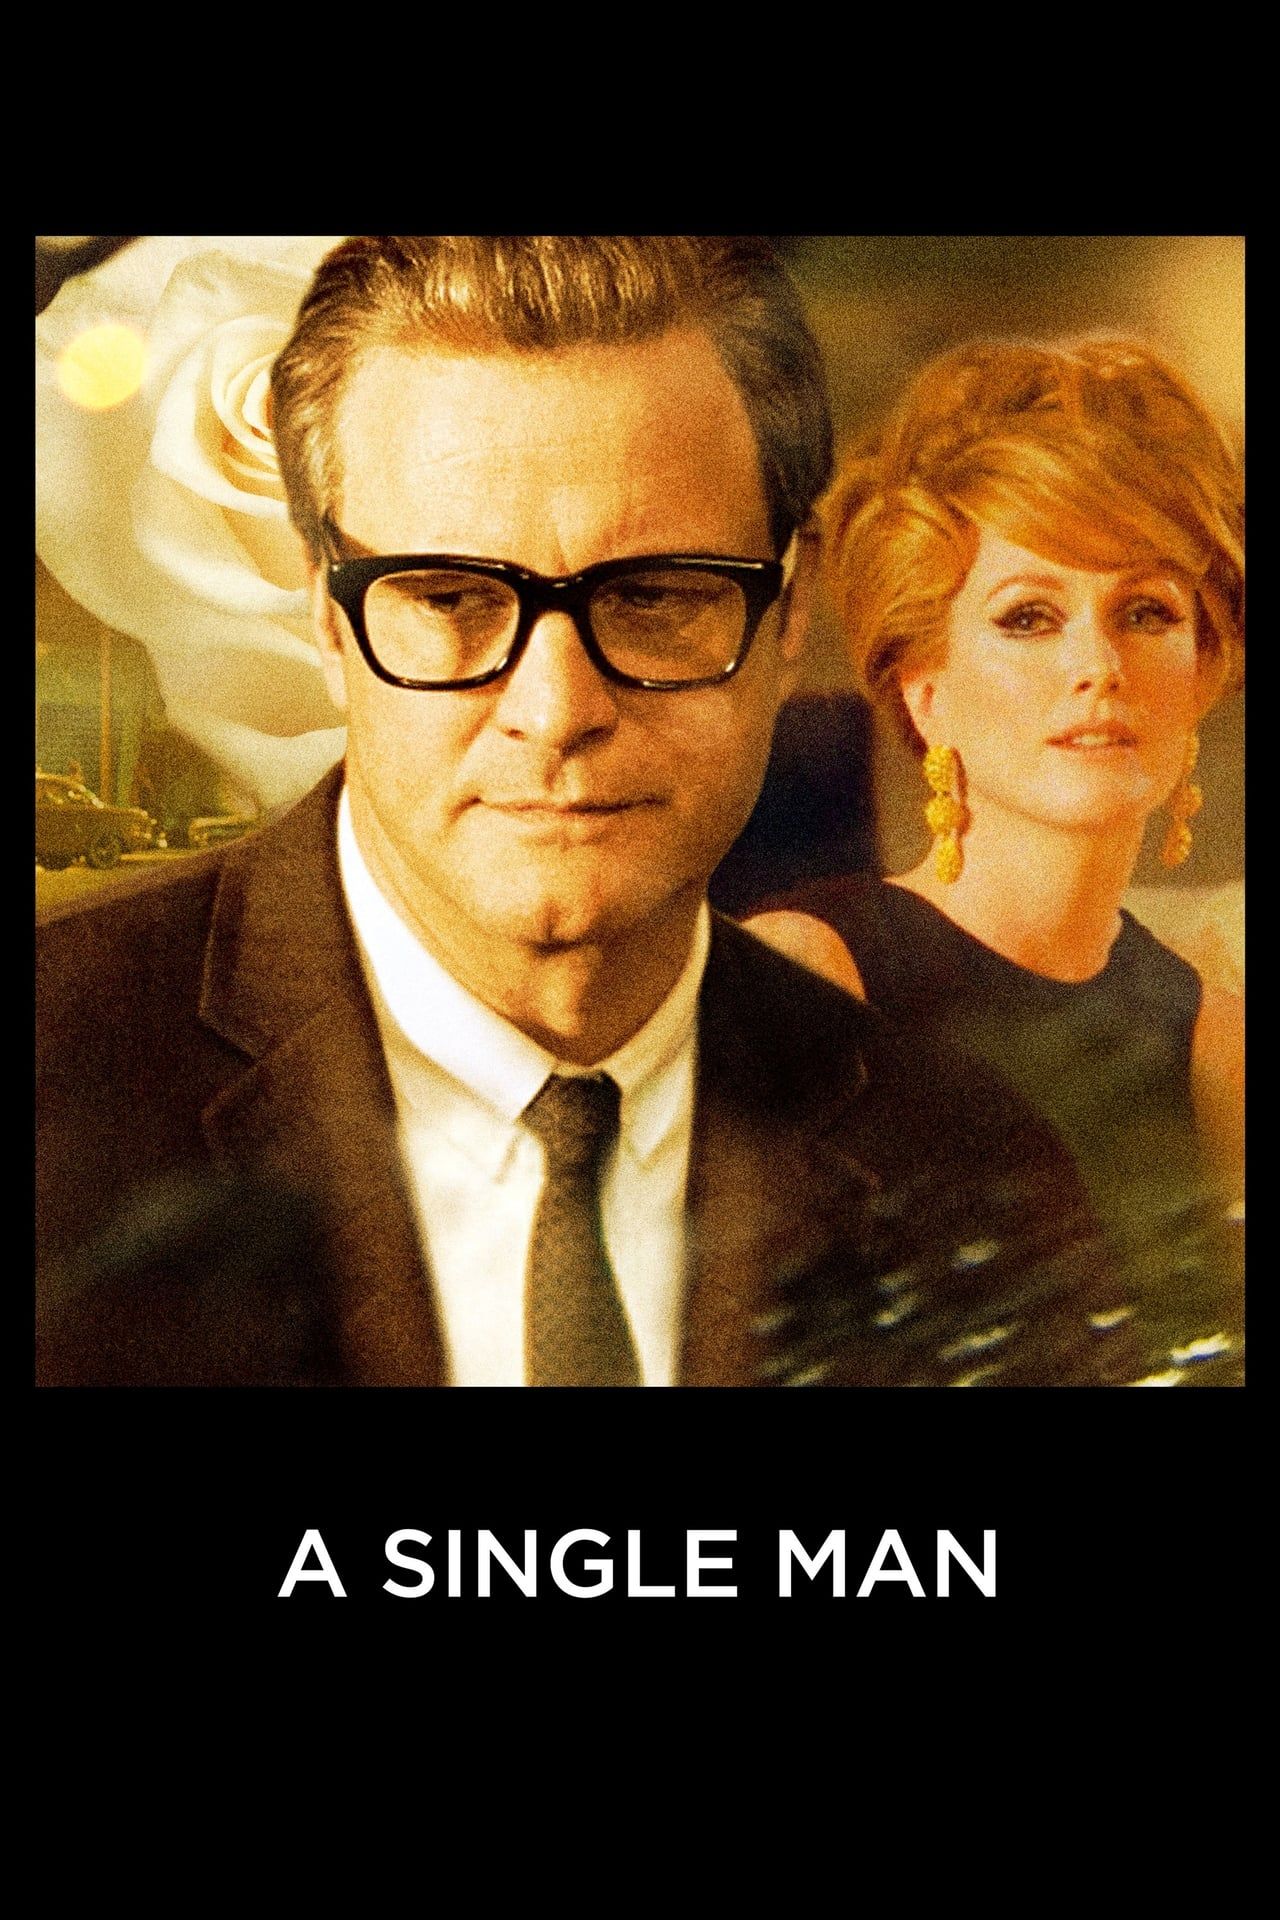 A Single Man Movie Poster Showing Colin Firth and Julianne Moore